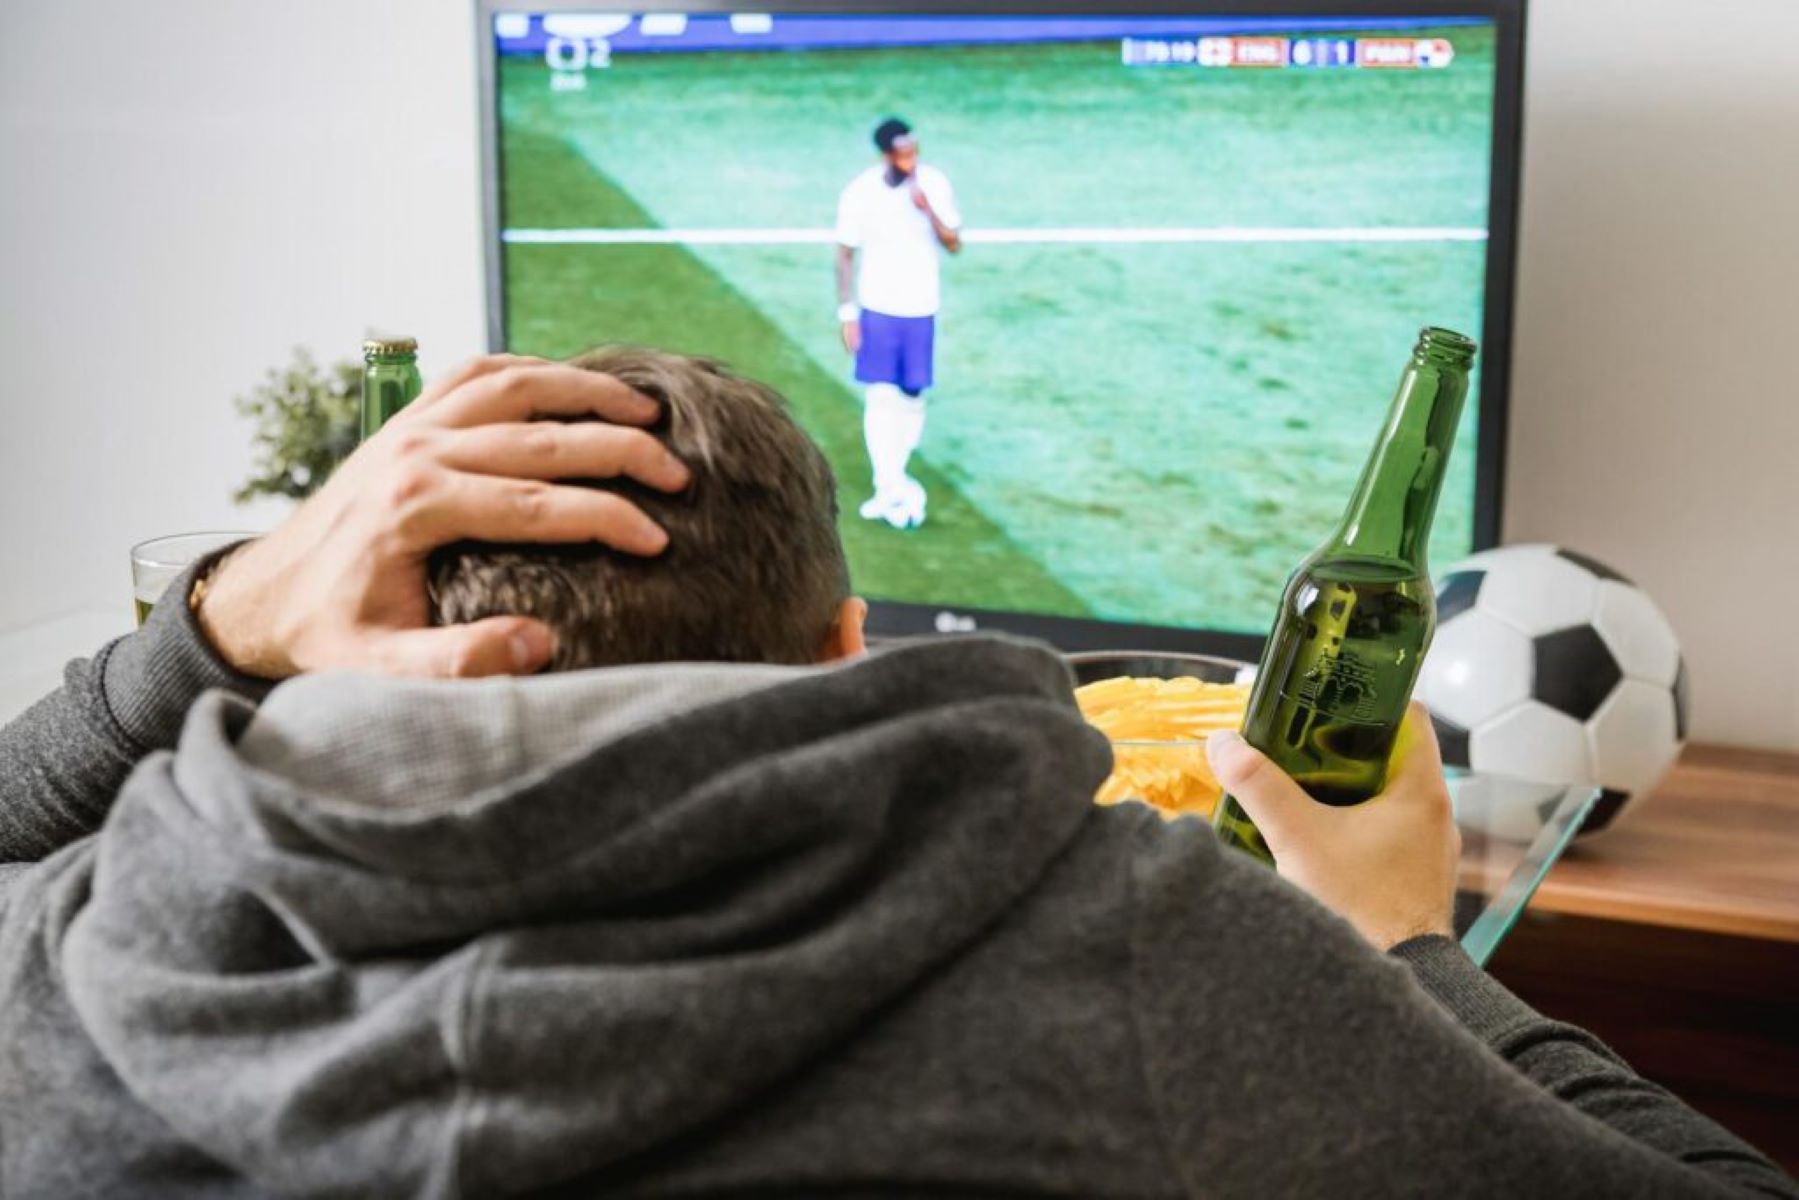 How To Watch The Soccer Games